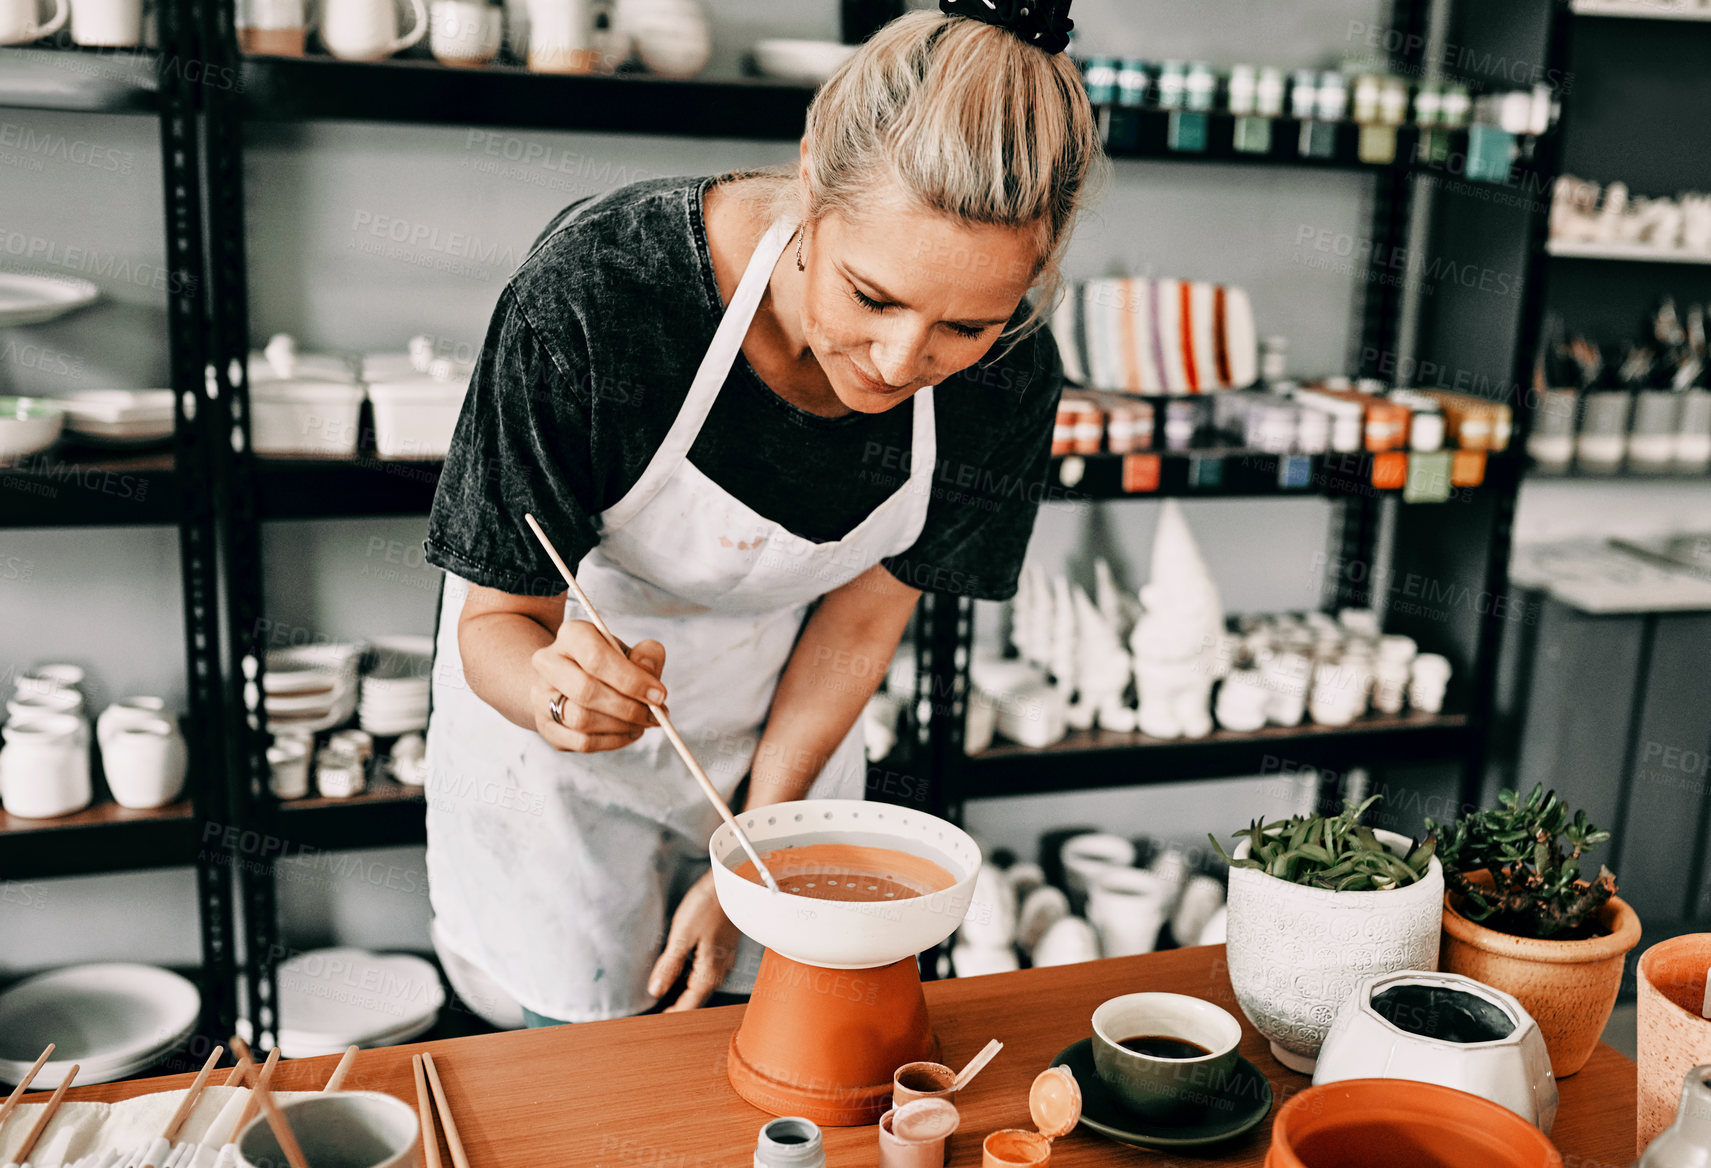 Buy stock photo Cropped shot of an attractive mature woman standing alone and painting a pottery bowl in her workshop